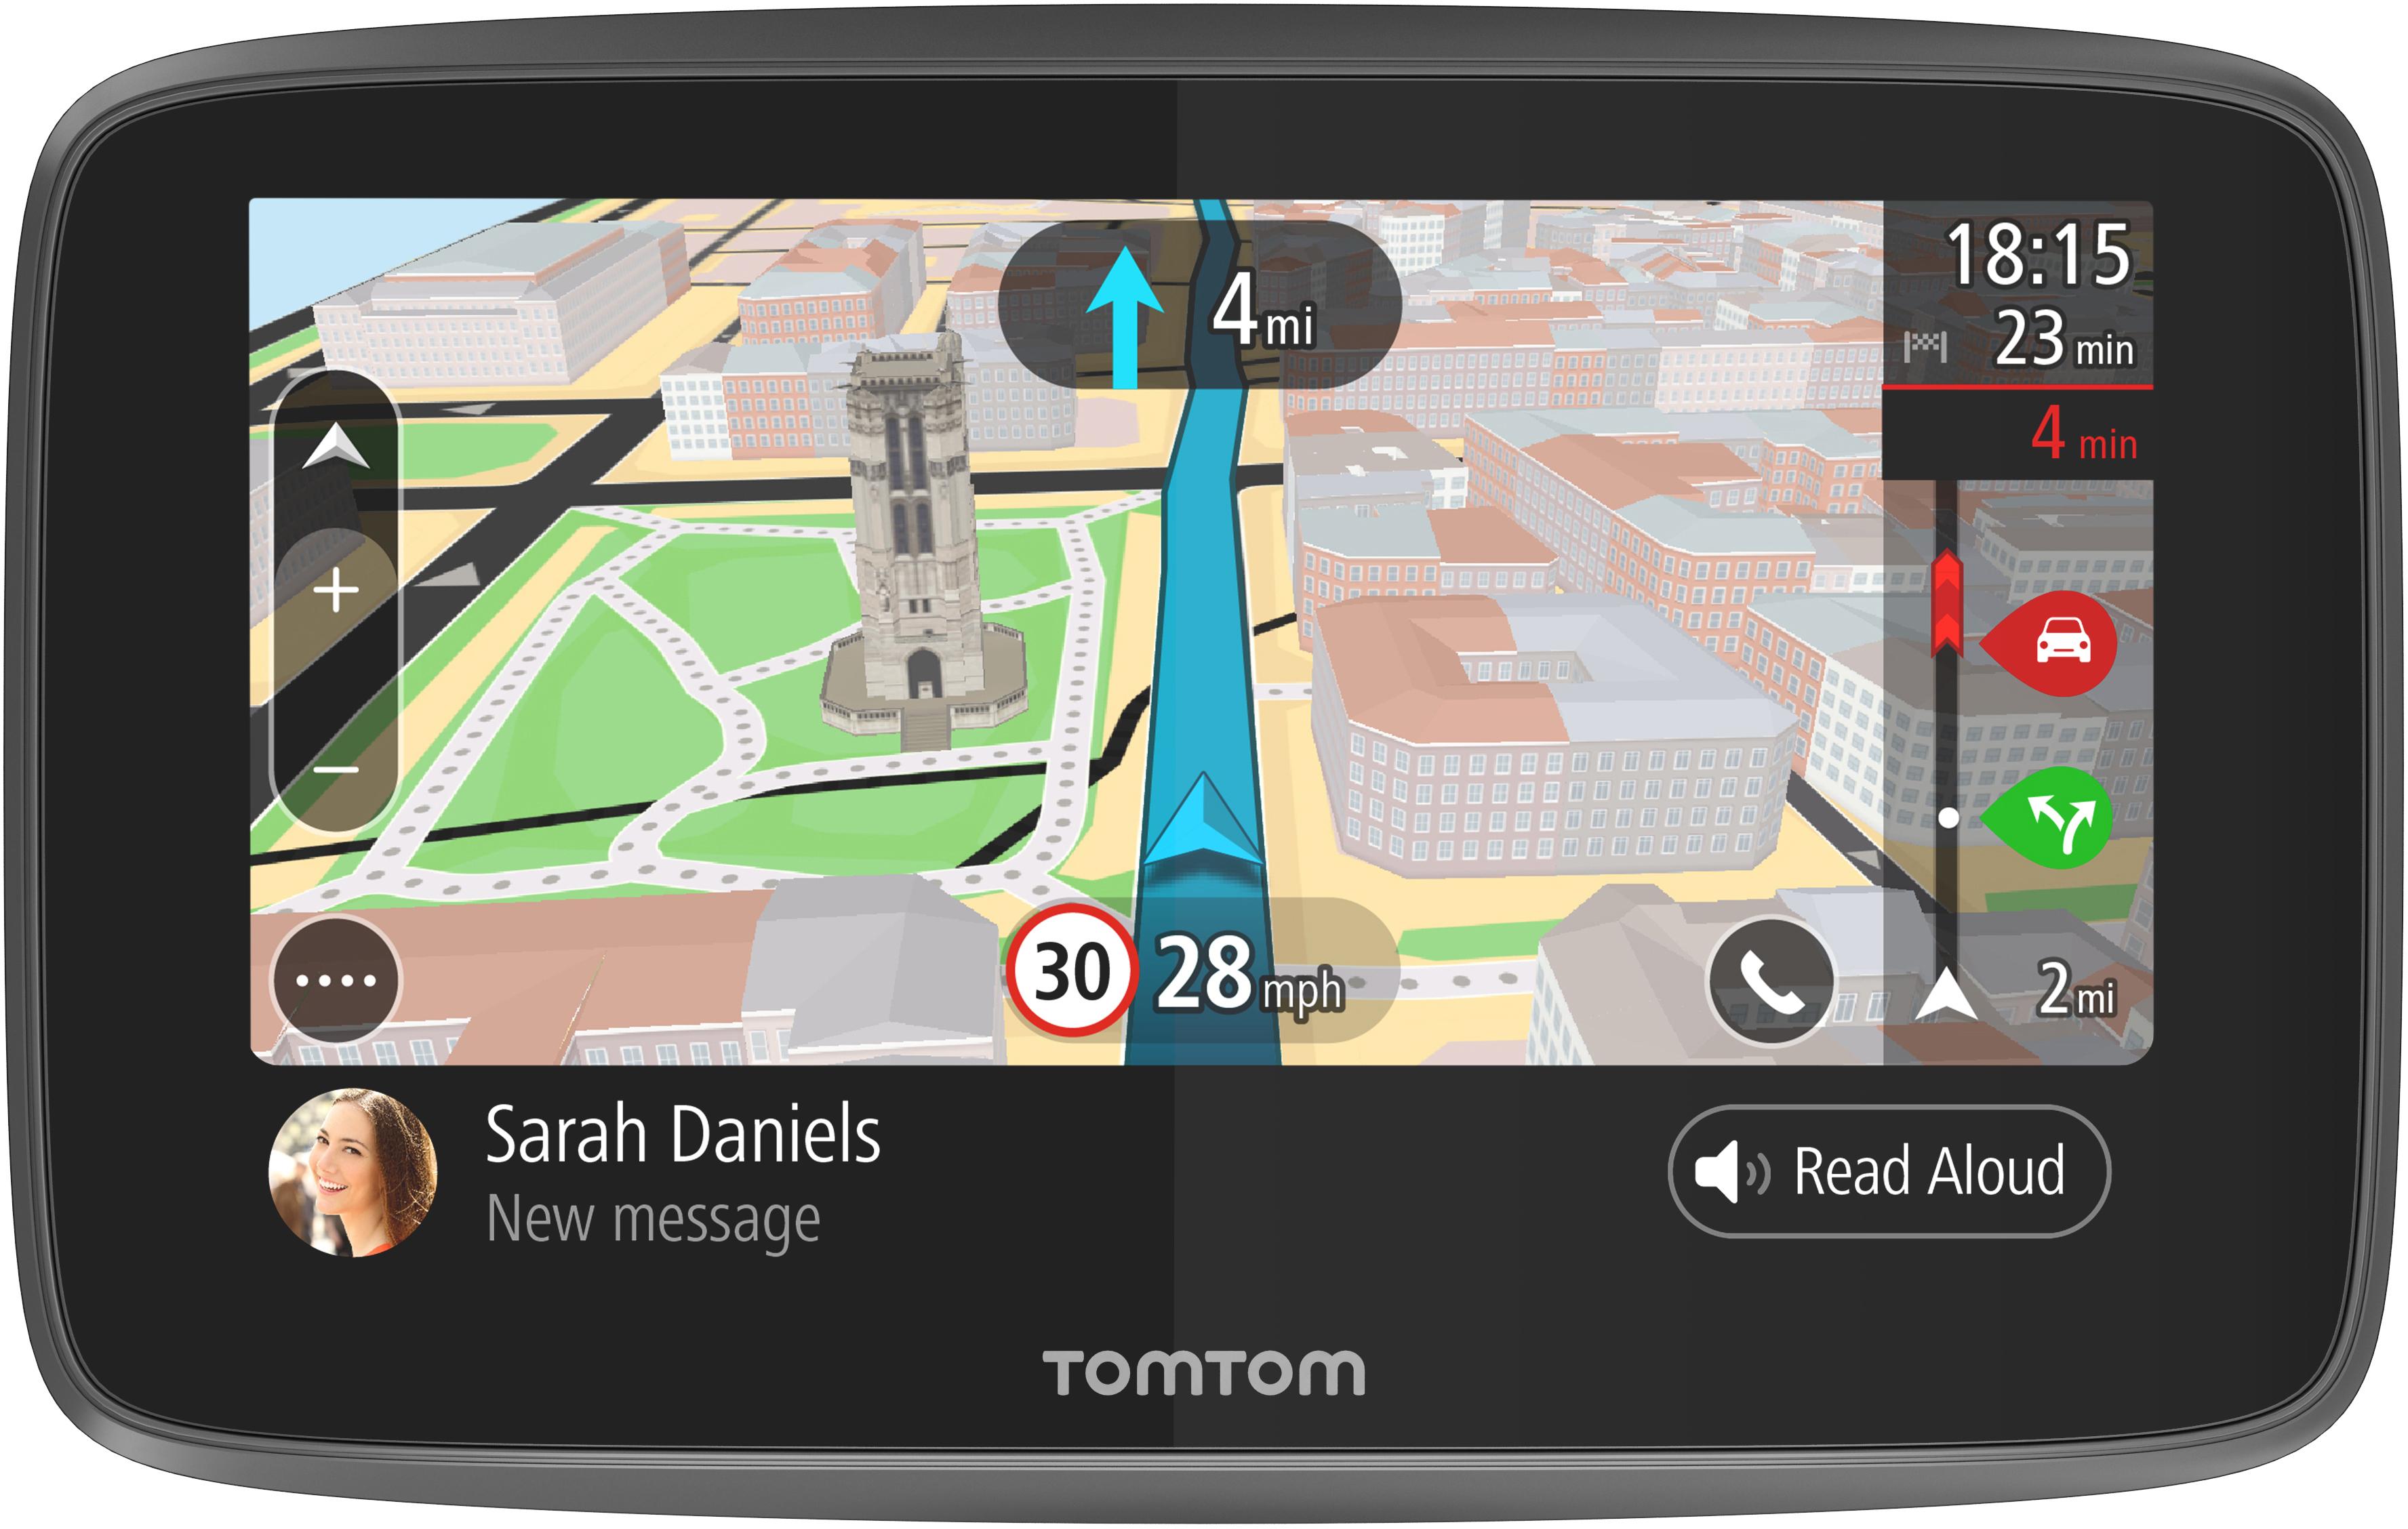 Refurbished Tomtom Go 5200 Car Sat Nav With Wi-Fi, Traffic, World Maps, Siri And Google Now Integration - Grade A